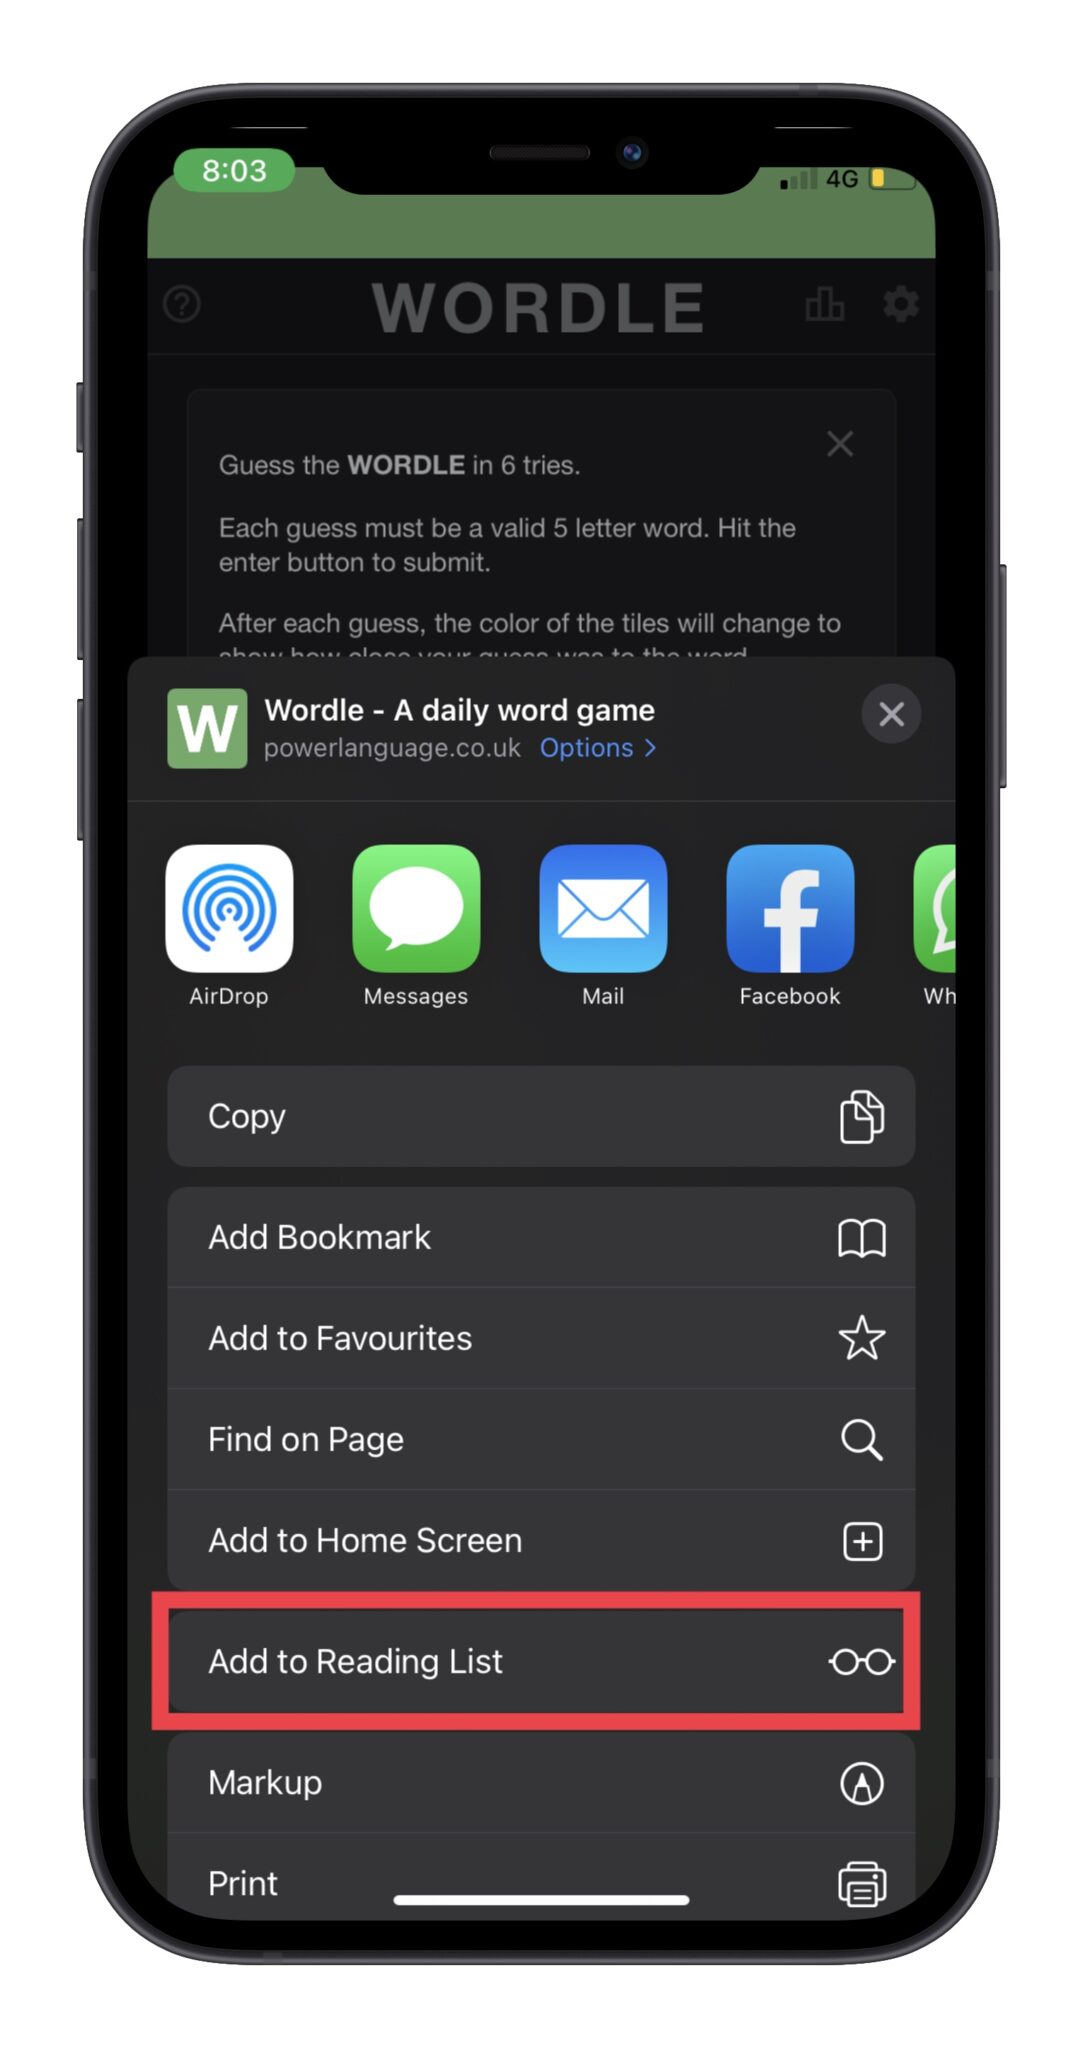 Choose Add to Reading List in Share Sheet on iPhone